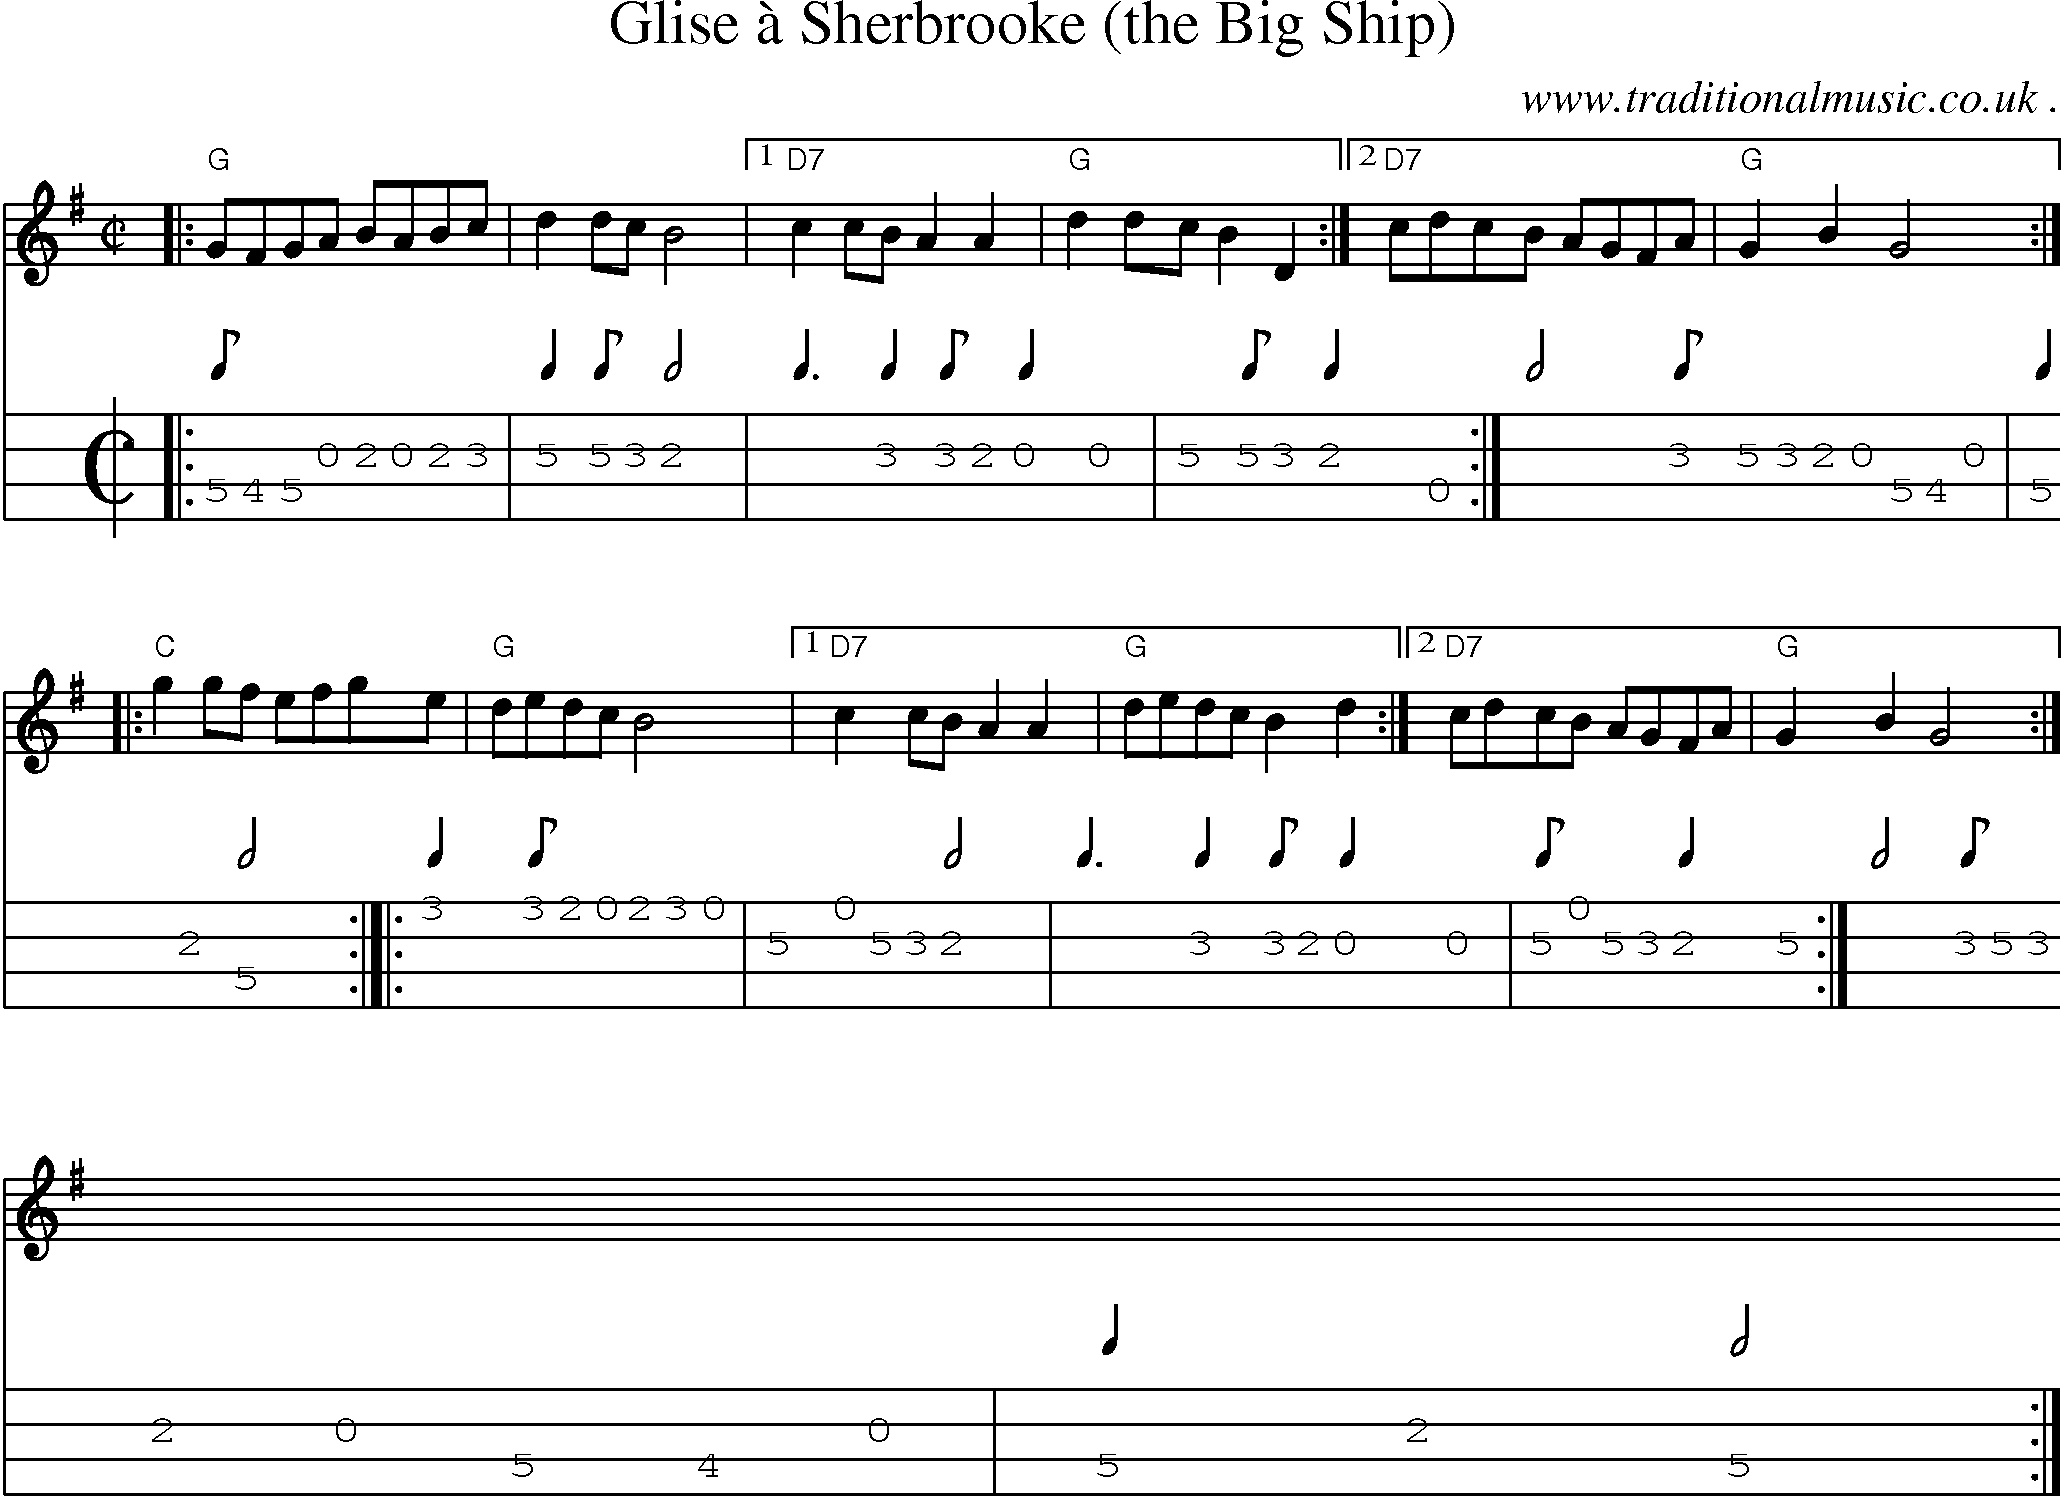 Sheet-music  score, Chords and Mandolin Tabs for Glise A Sherbrooke The Big Ship